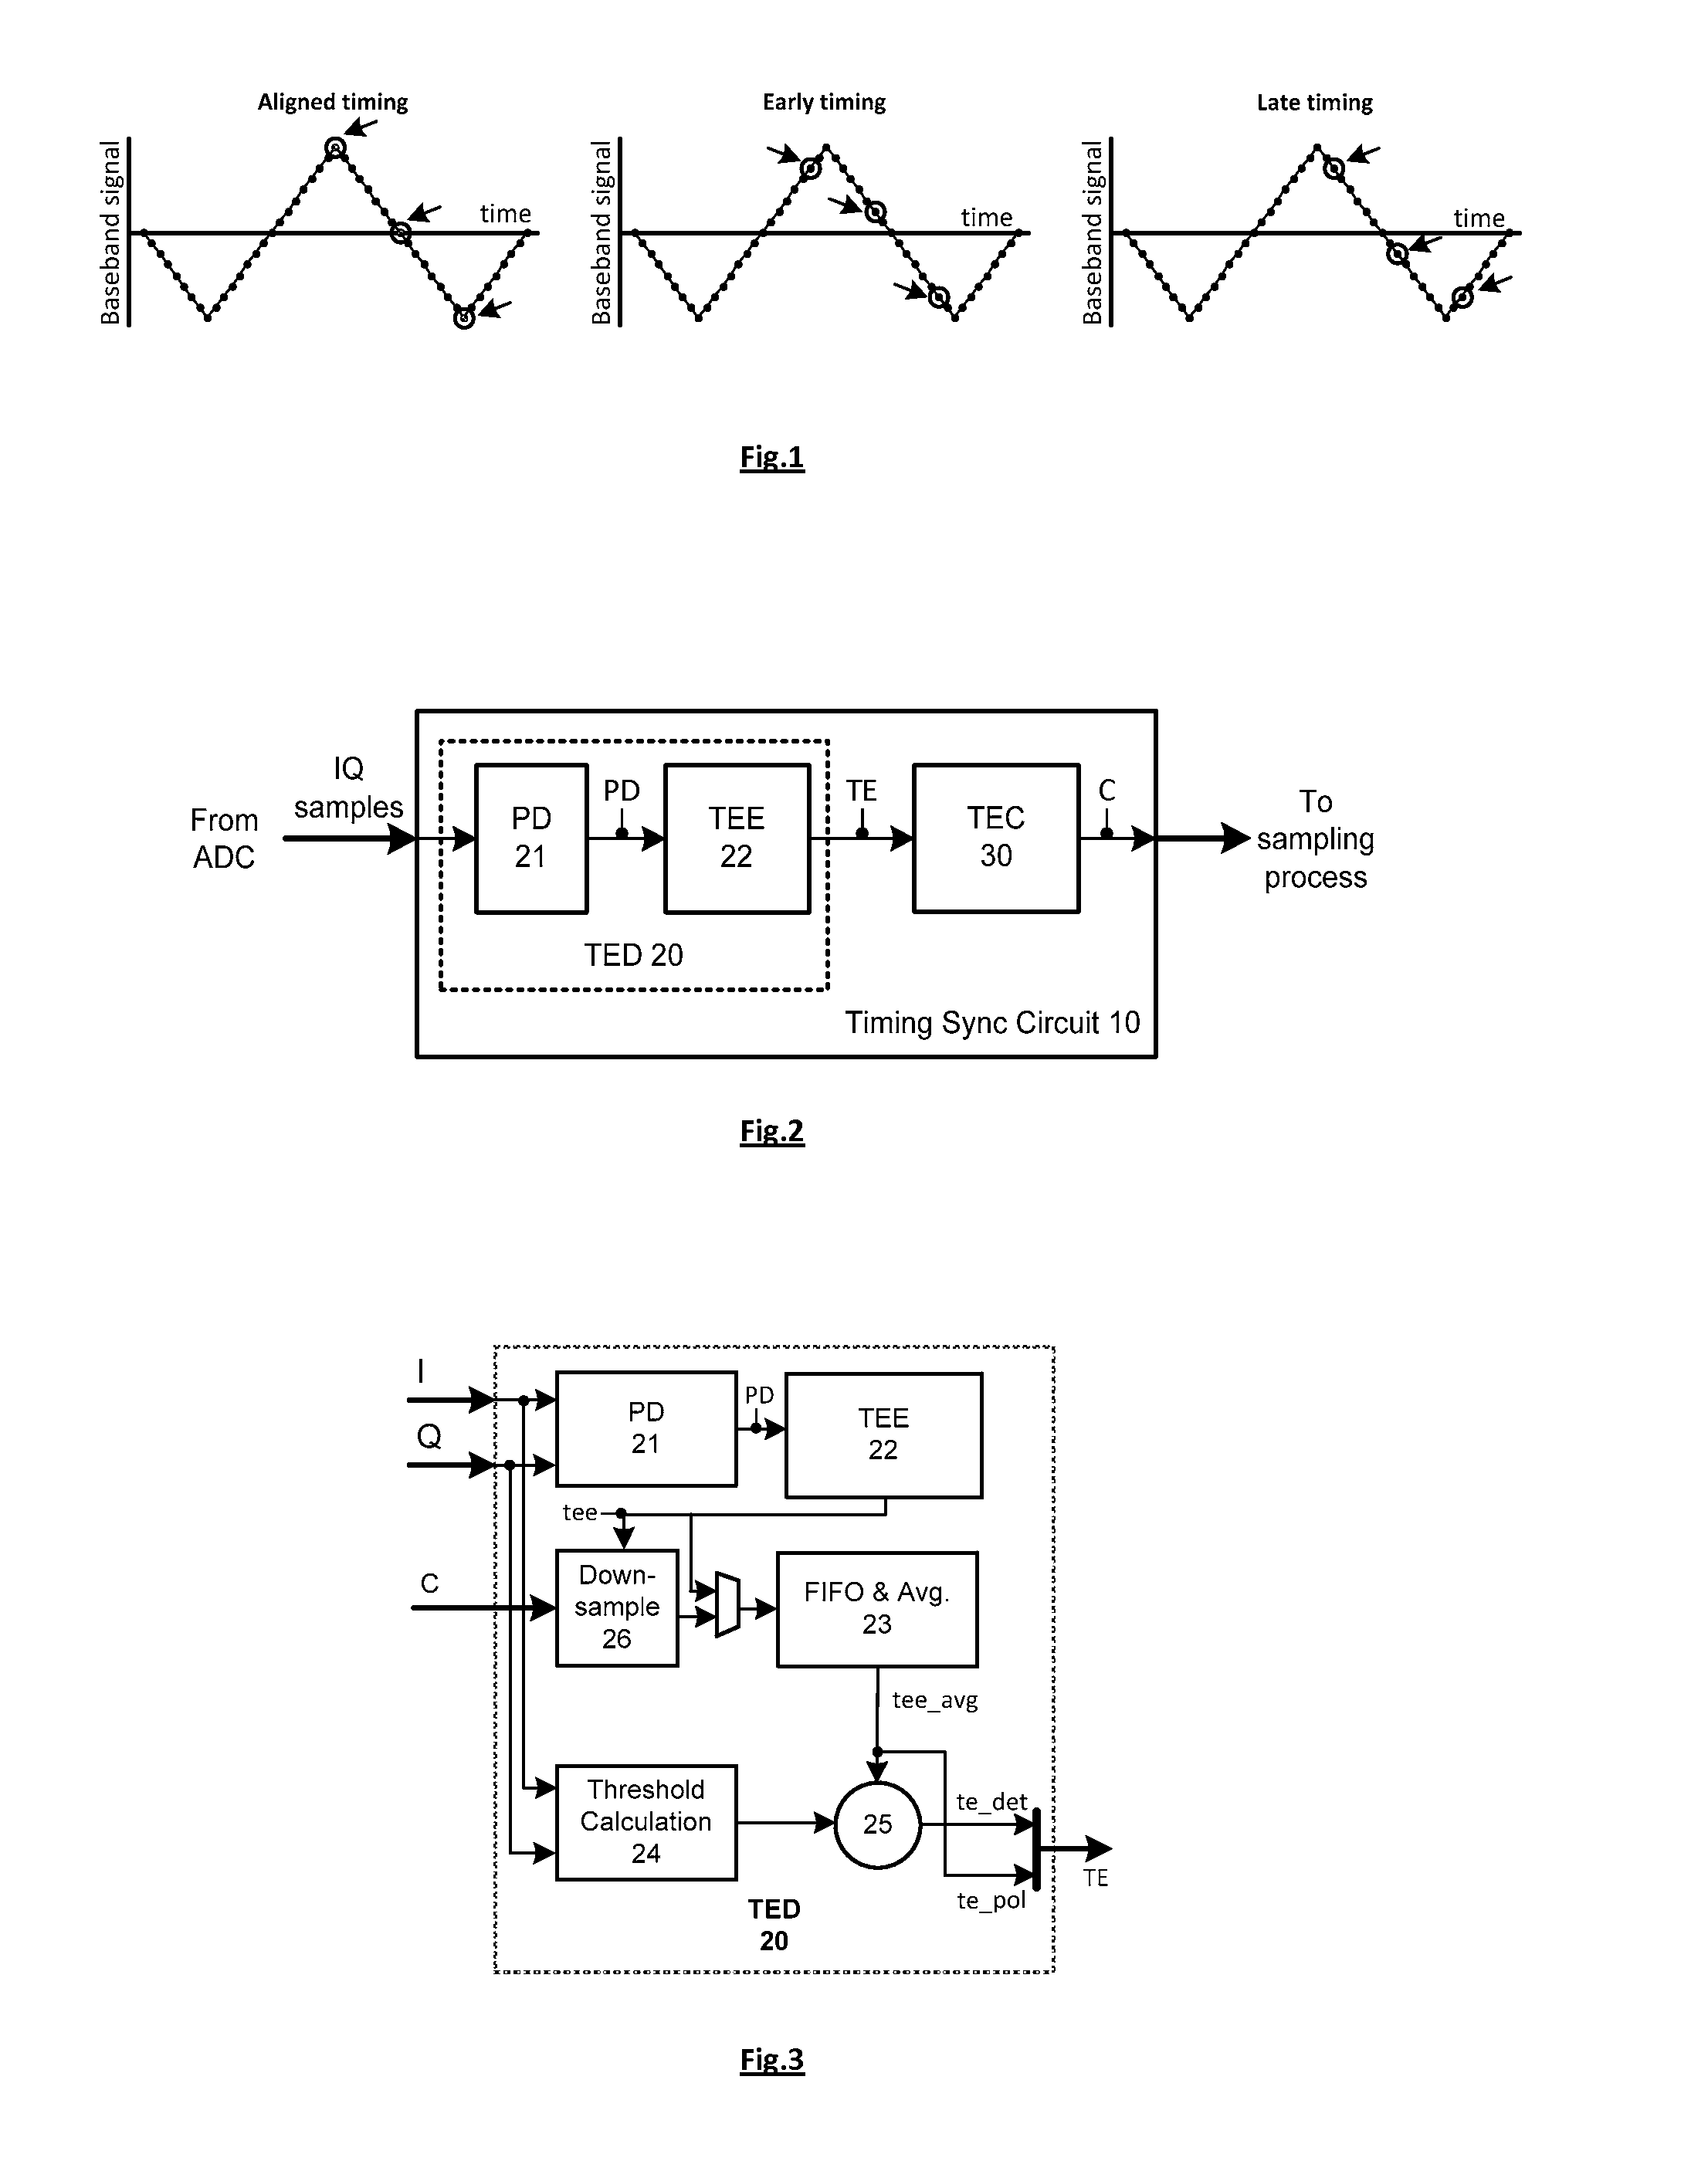 Circuit for Symbol Timing Synchronization